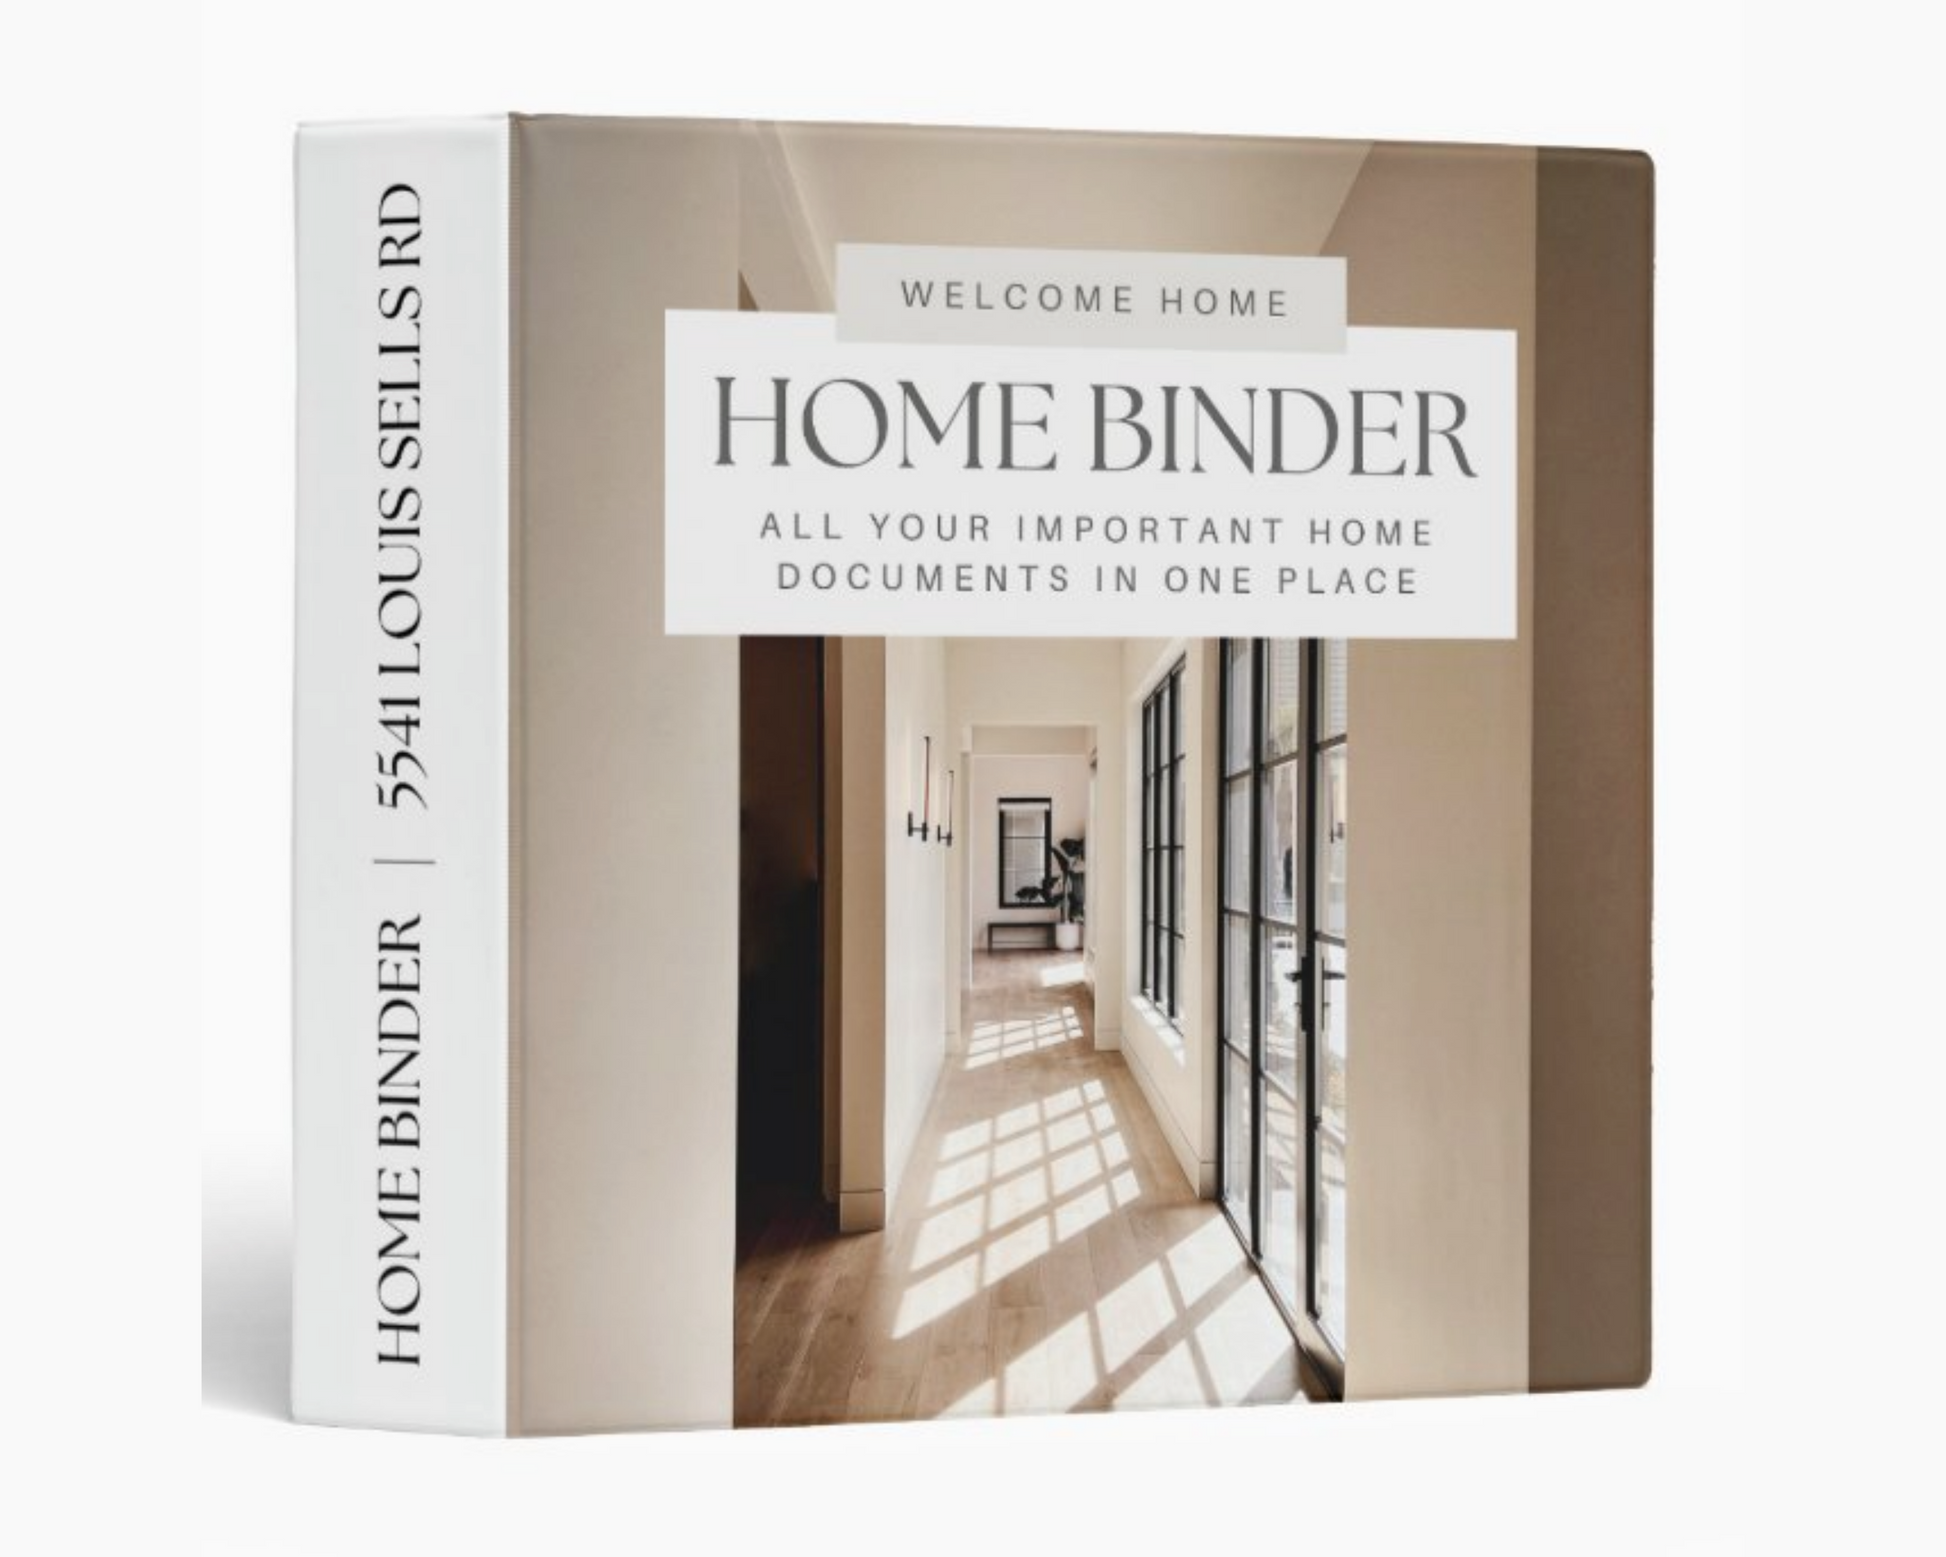 Real Estate Client Closing Gift, New Home Binder, Home Buyer Packet, Real Estate Marketing, Client Exit Packet, Real Estate Guide, Canva